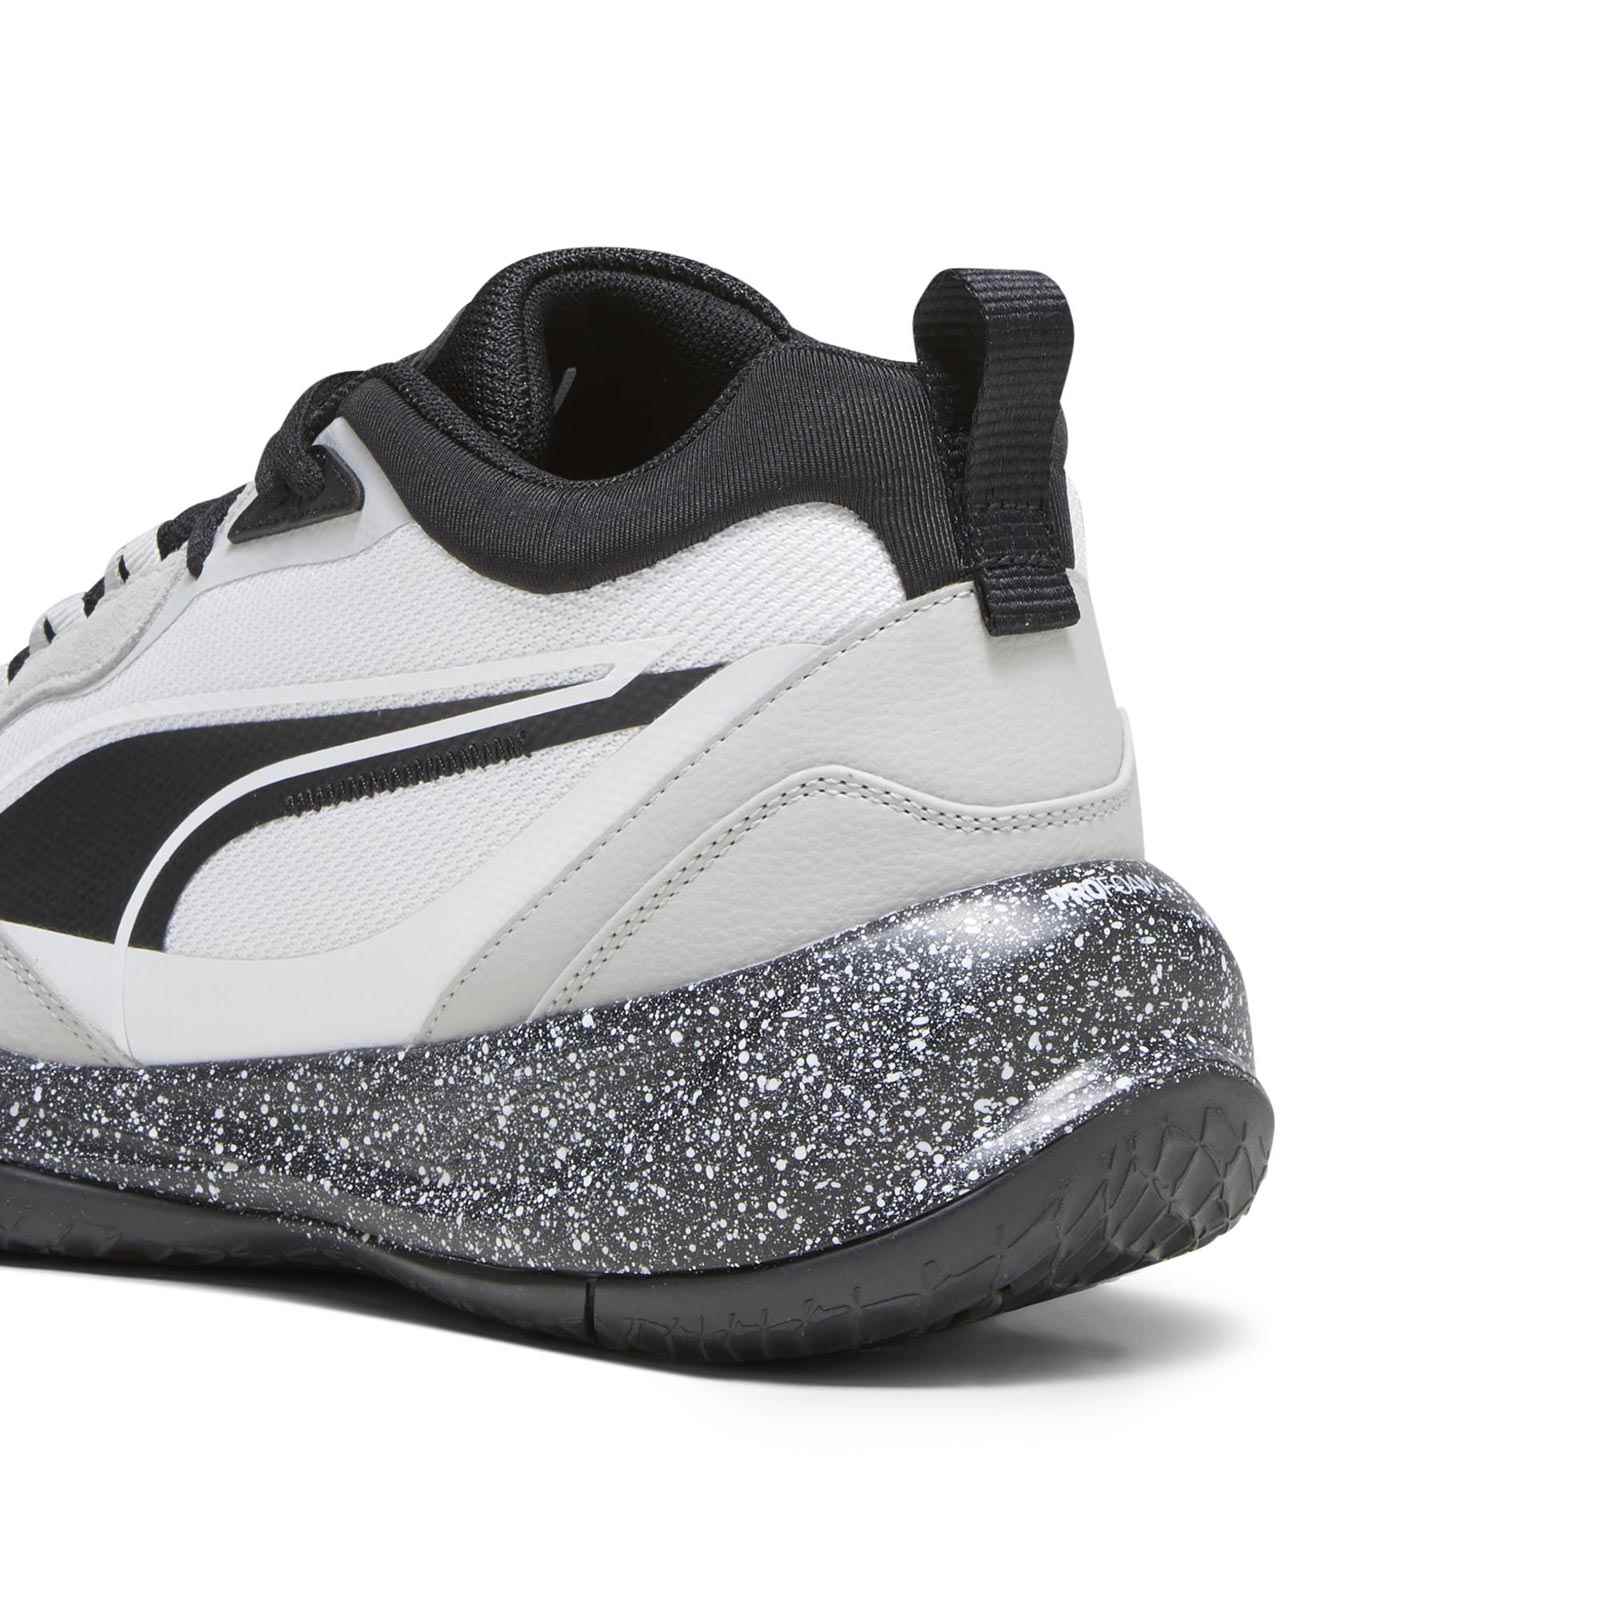 PUMA PLAYMAKER PRO LOW BASKETBALL SHOES